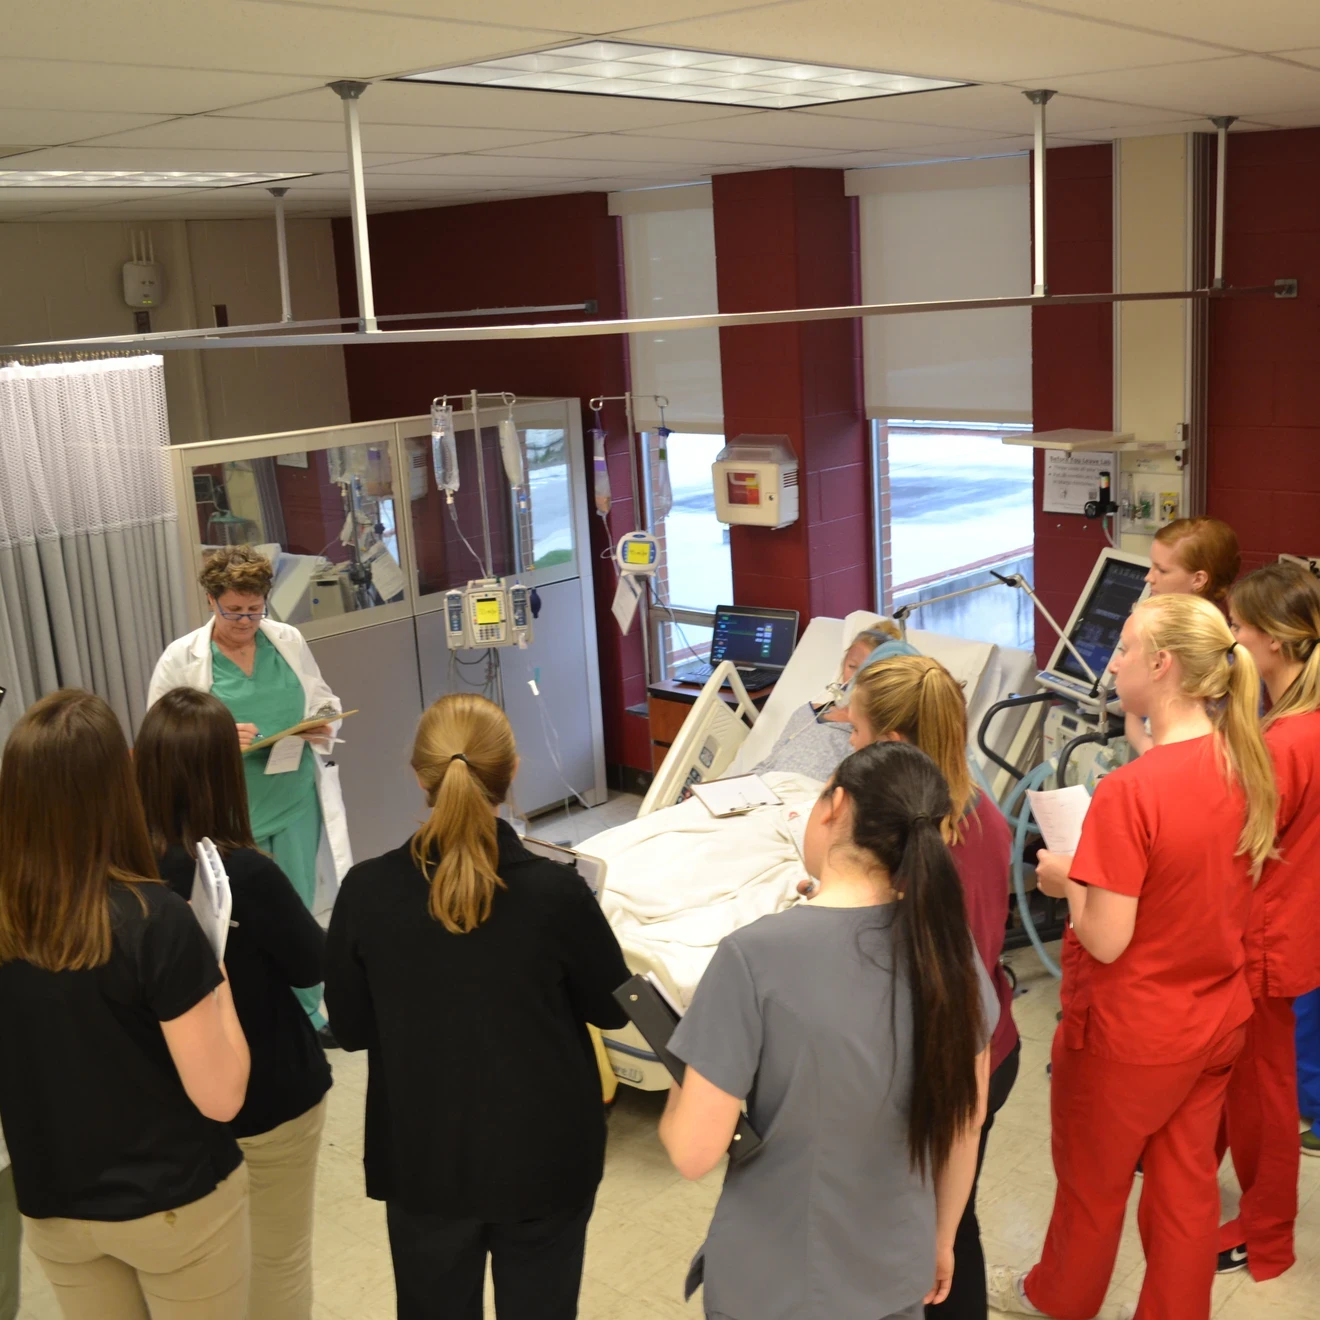 Health Care students in a circle around a patient bed